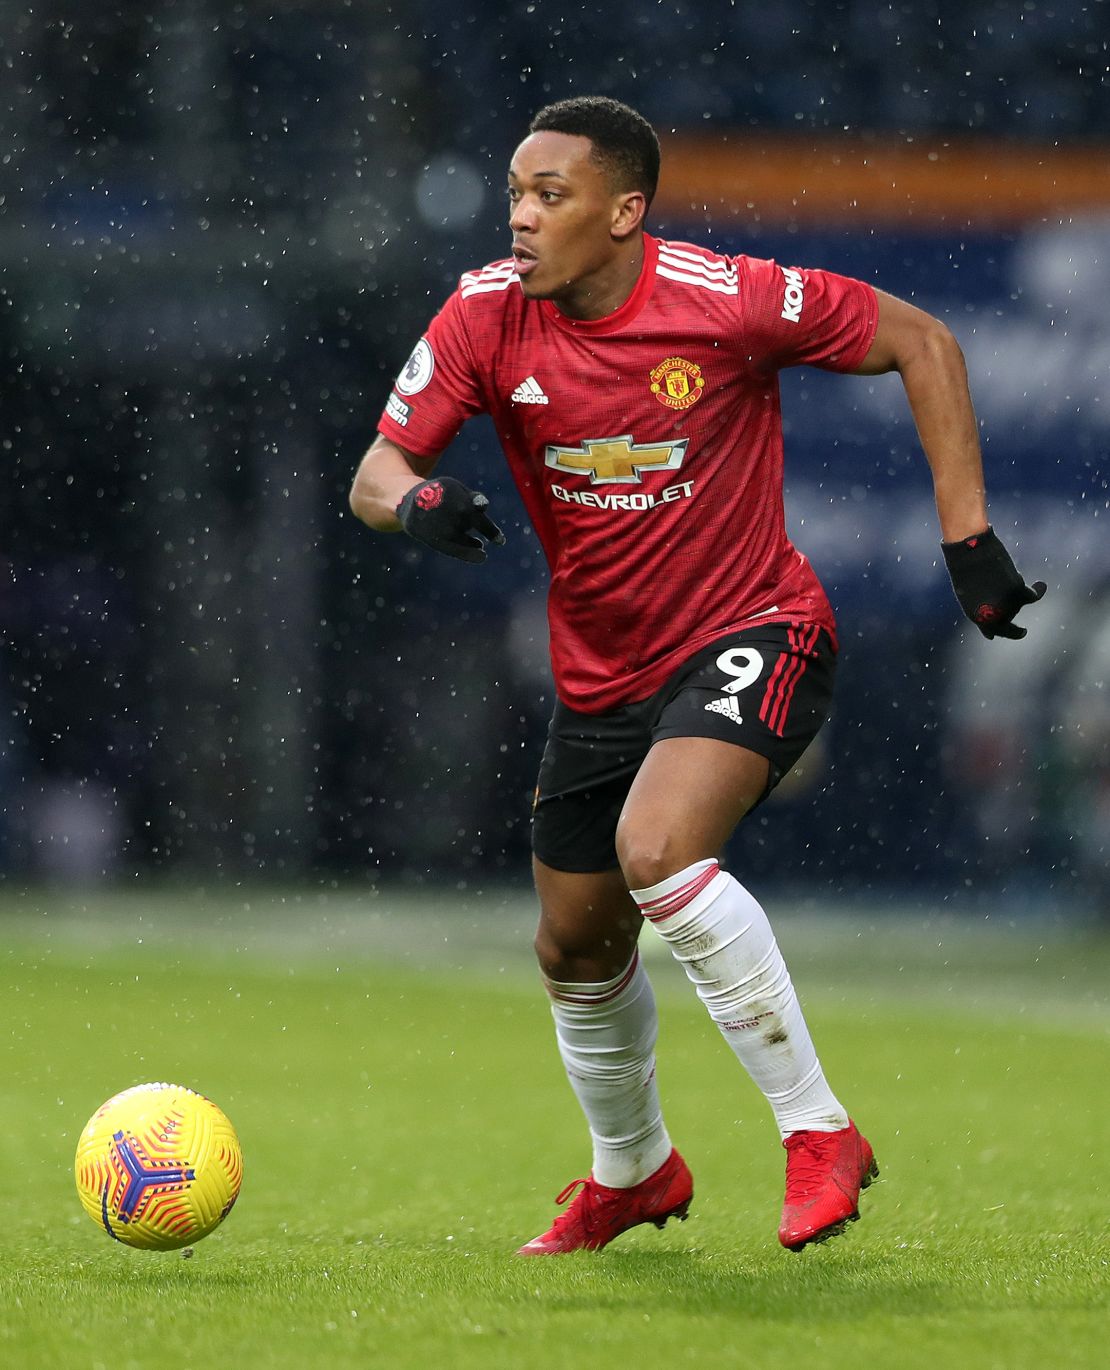 Anthony Martial was racially abused on social media after Manchester United's draw against West Brom.